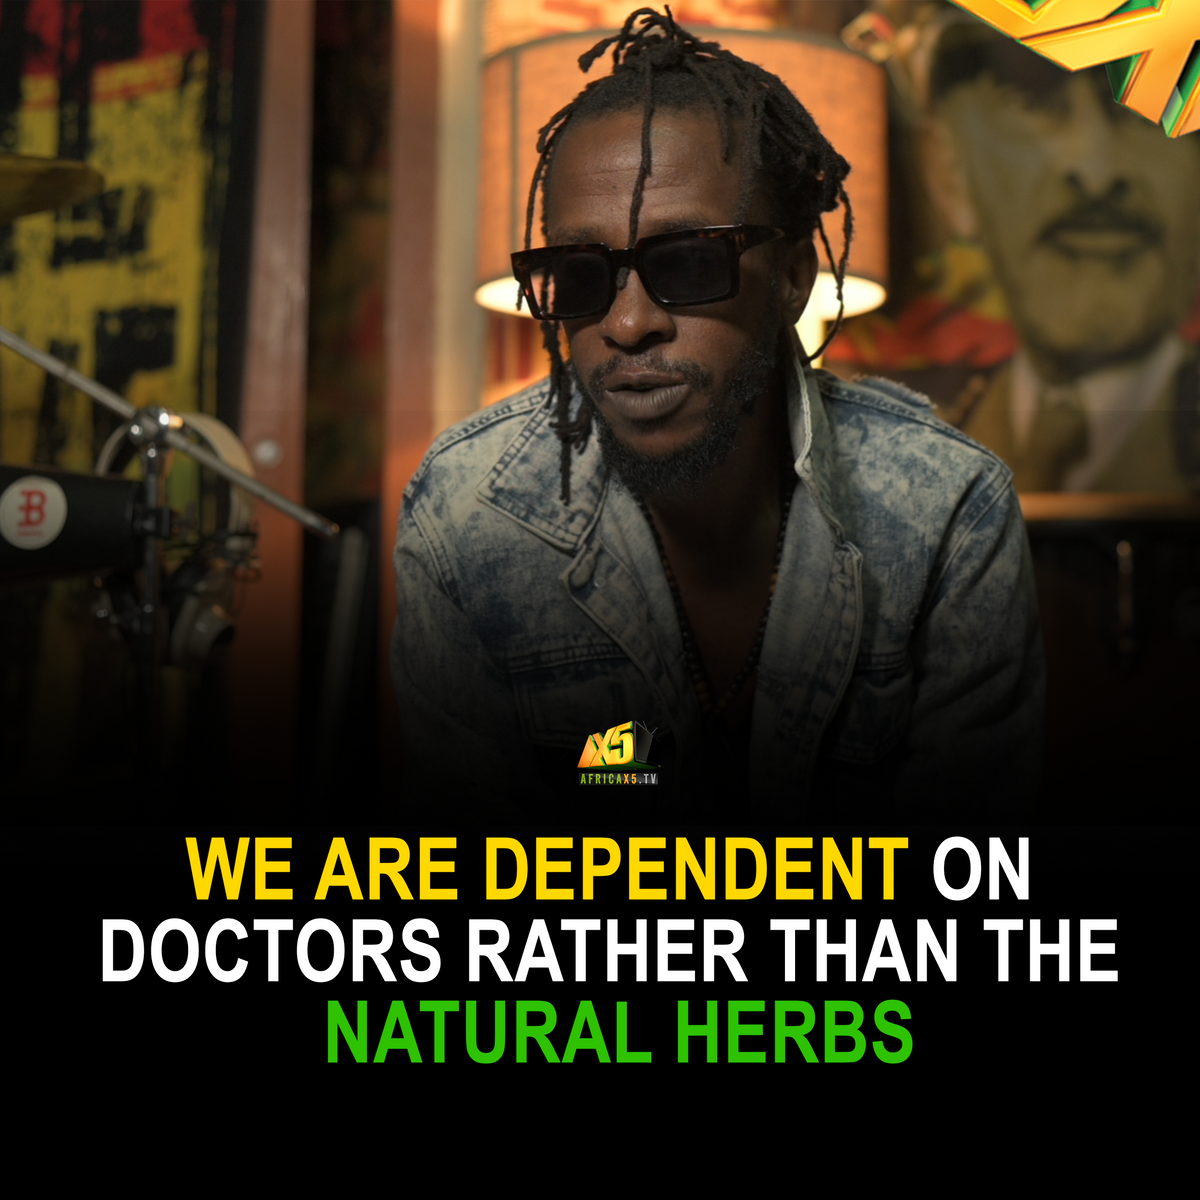 We are dependent on doctors rather than natural herbs - 🇯🇲Jamaica Vox Pop!